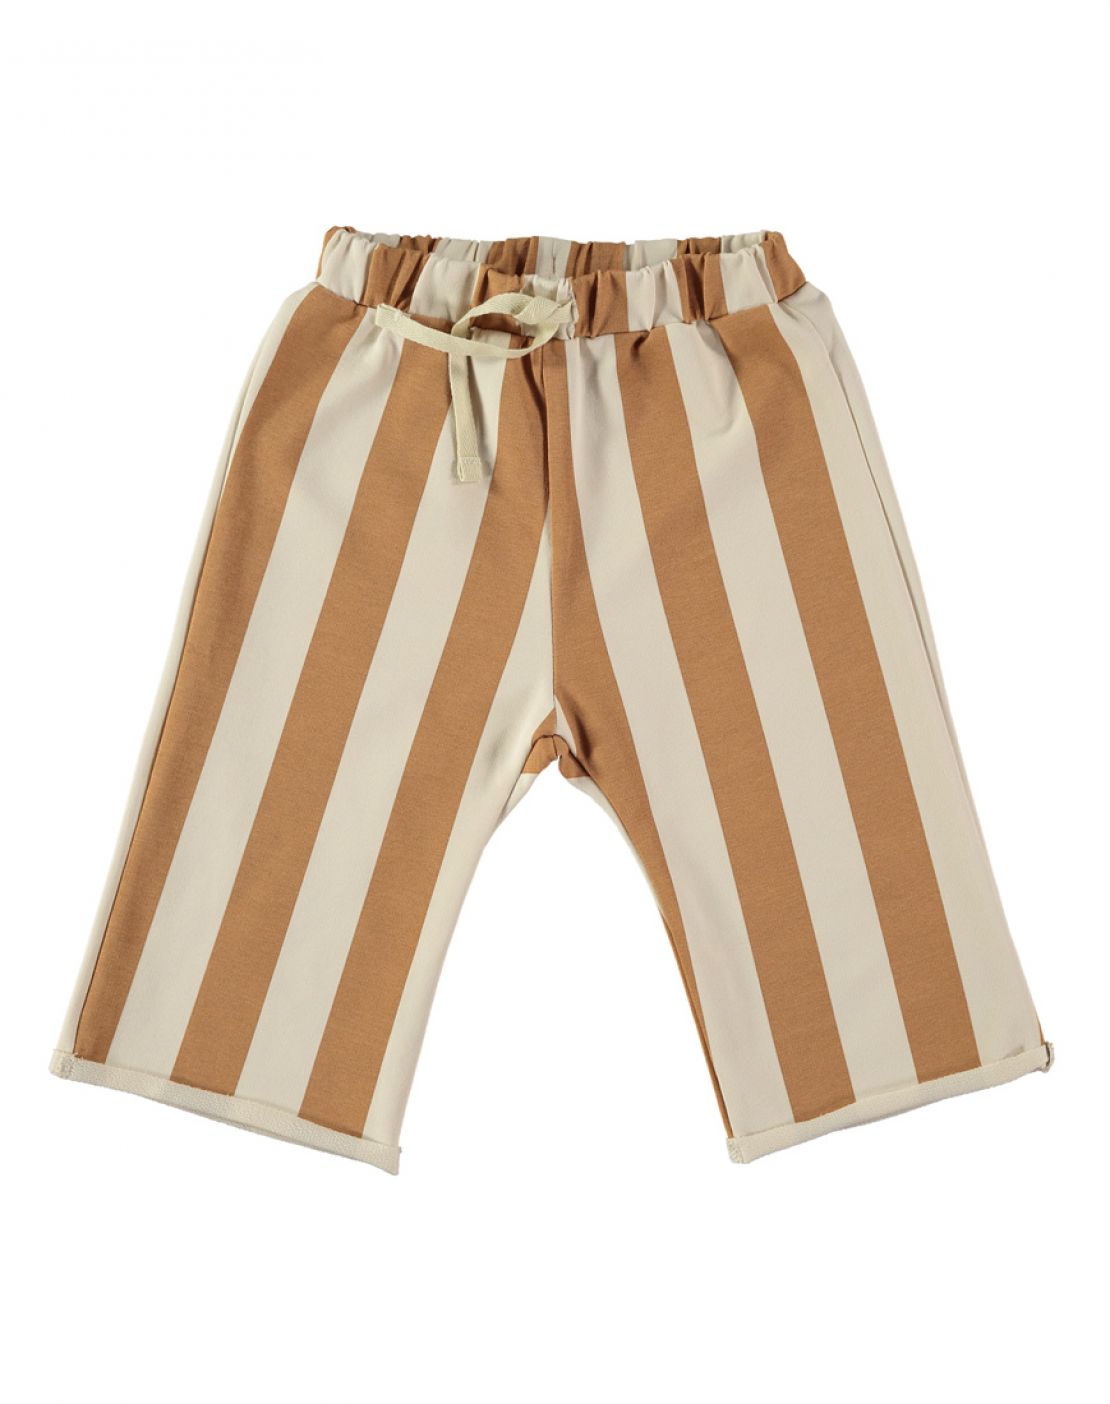 Culotte Pants - Stripes Clay